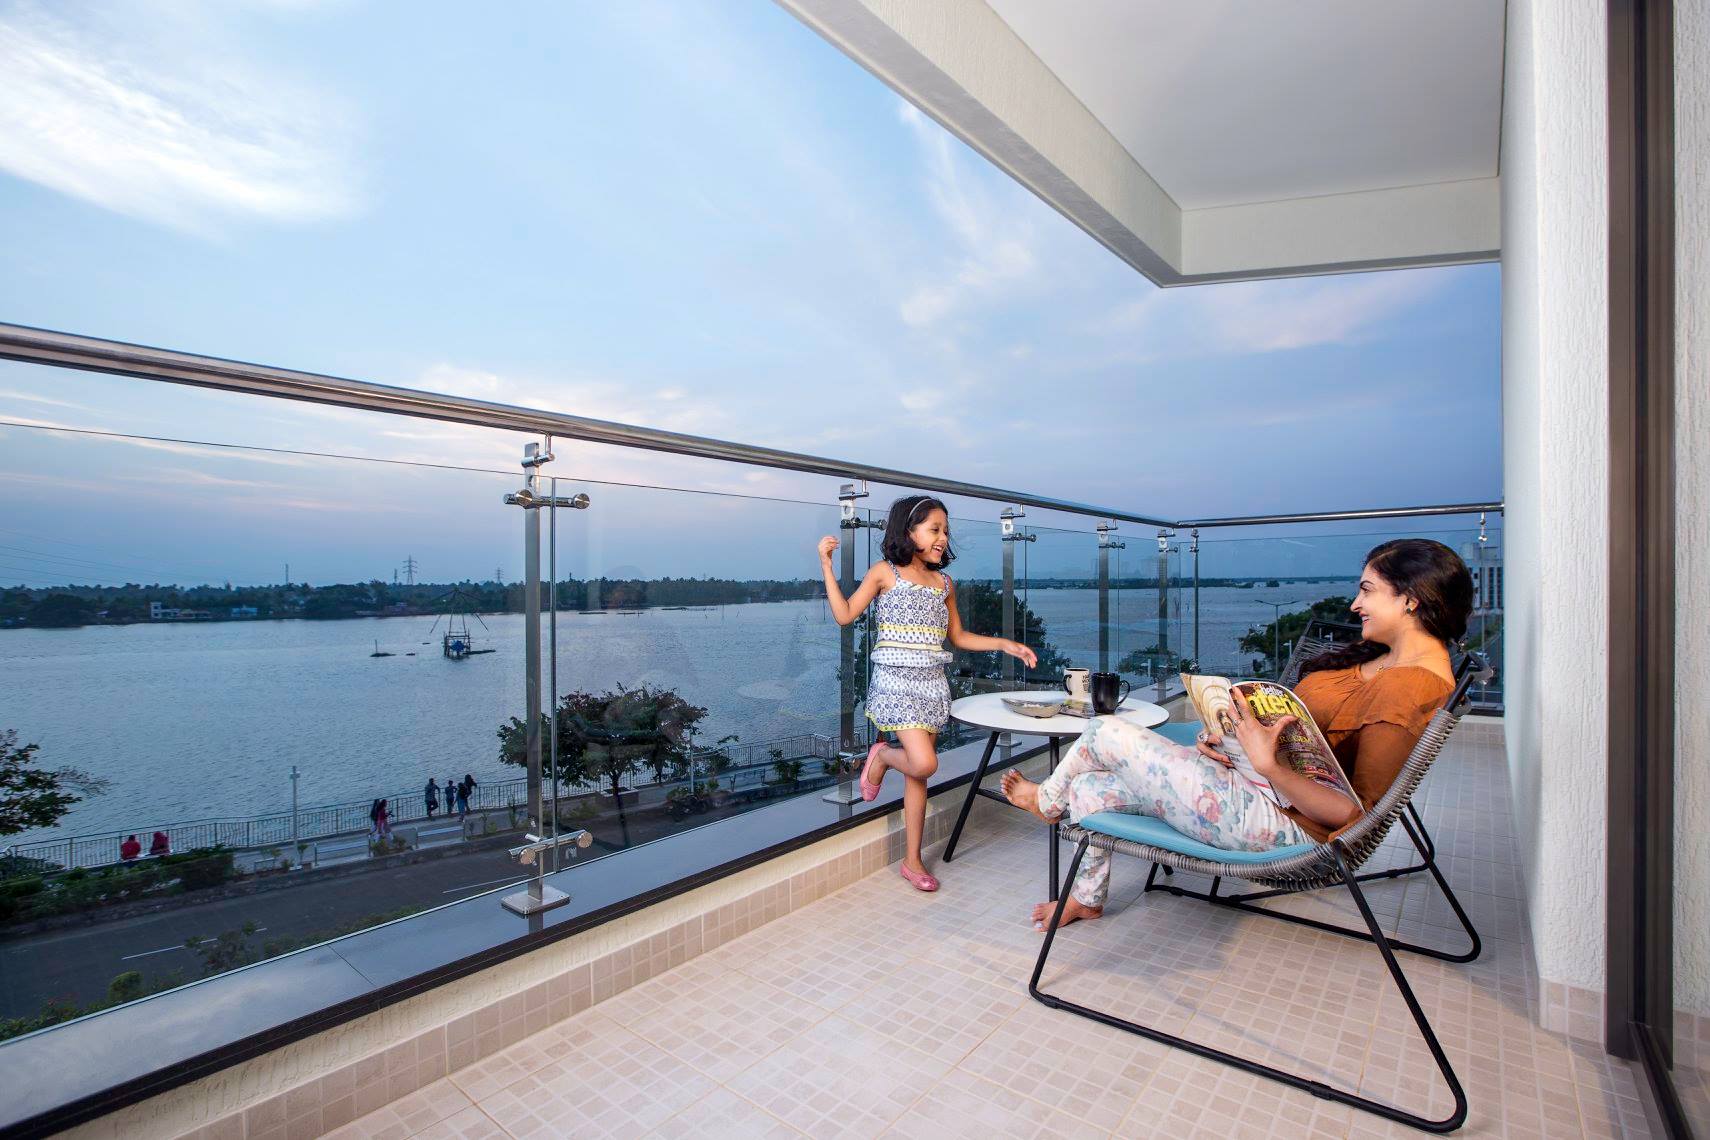 Marina One, Kochi Property, Sea view apartments, Sea Facing property, Waterfront property, Coastal property, Kochi real estate, CRZ free property, India real estate news, Indian realty news, Real estate news India, Indian property market news, Realty Plus, Track2Realty, Second homes, Leisure homes, Luxury homes